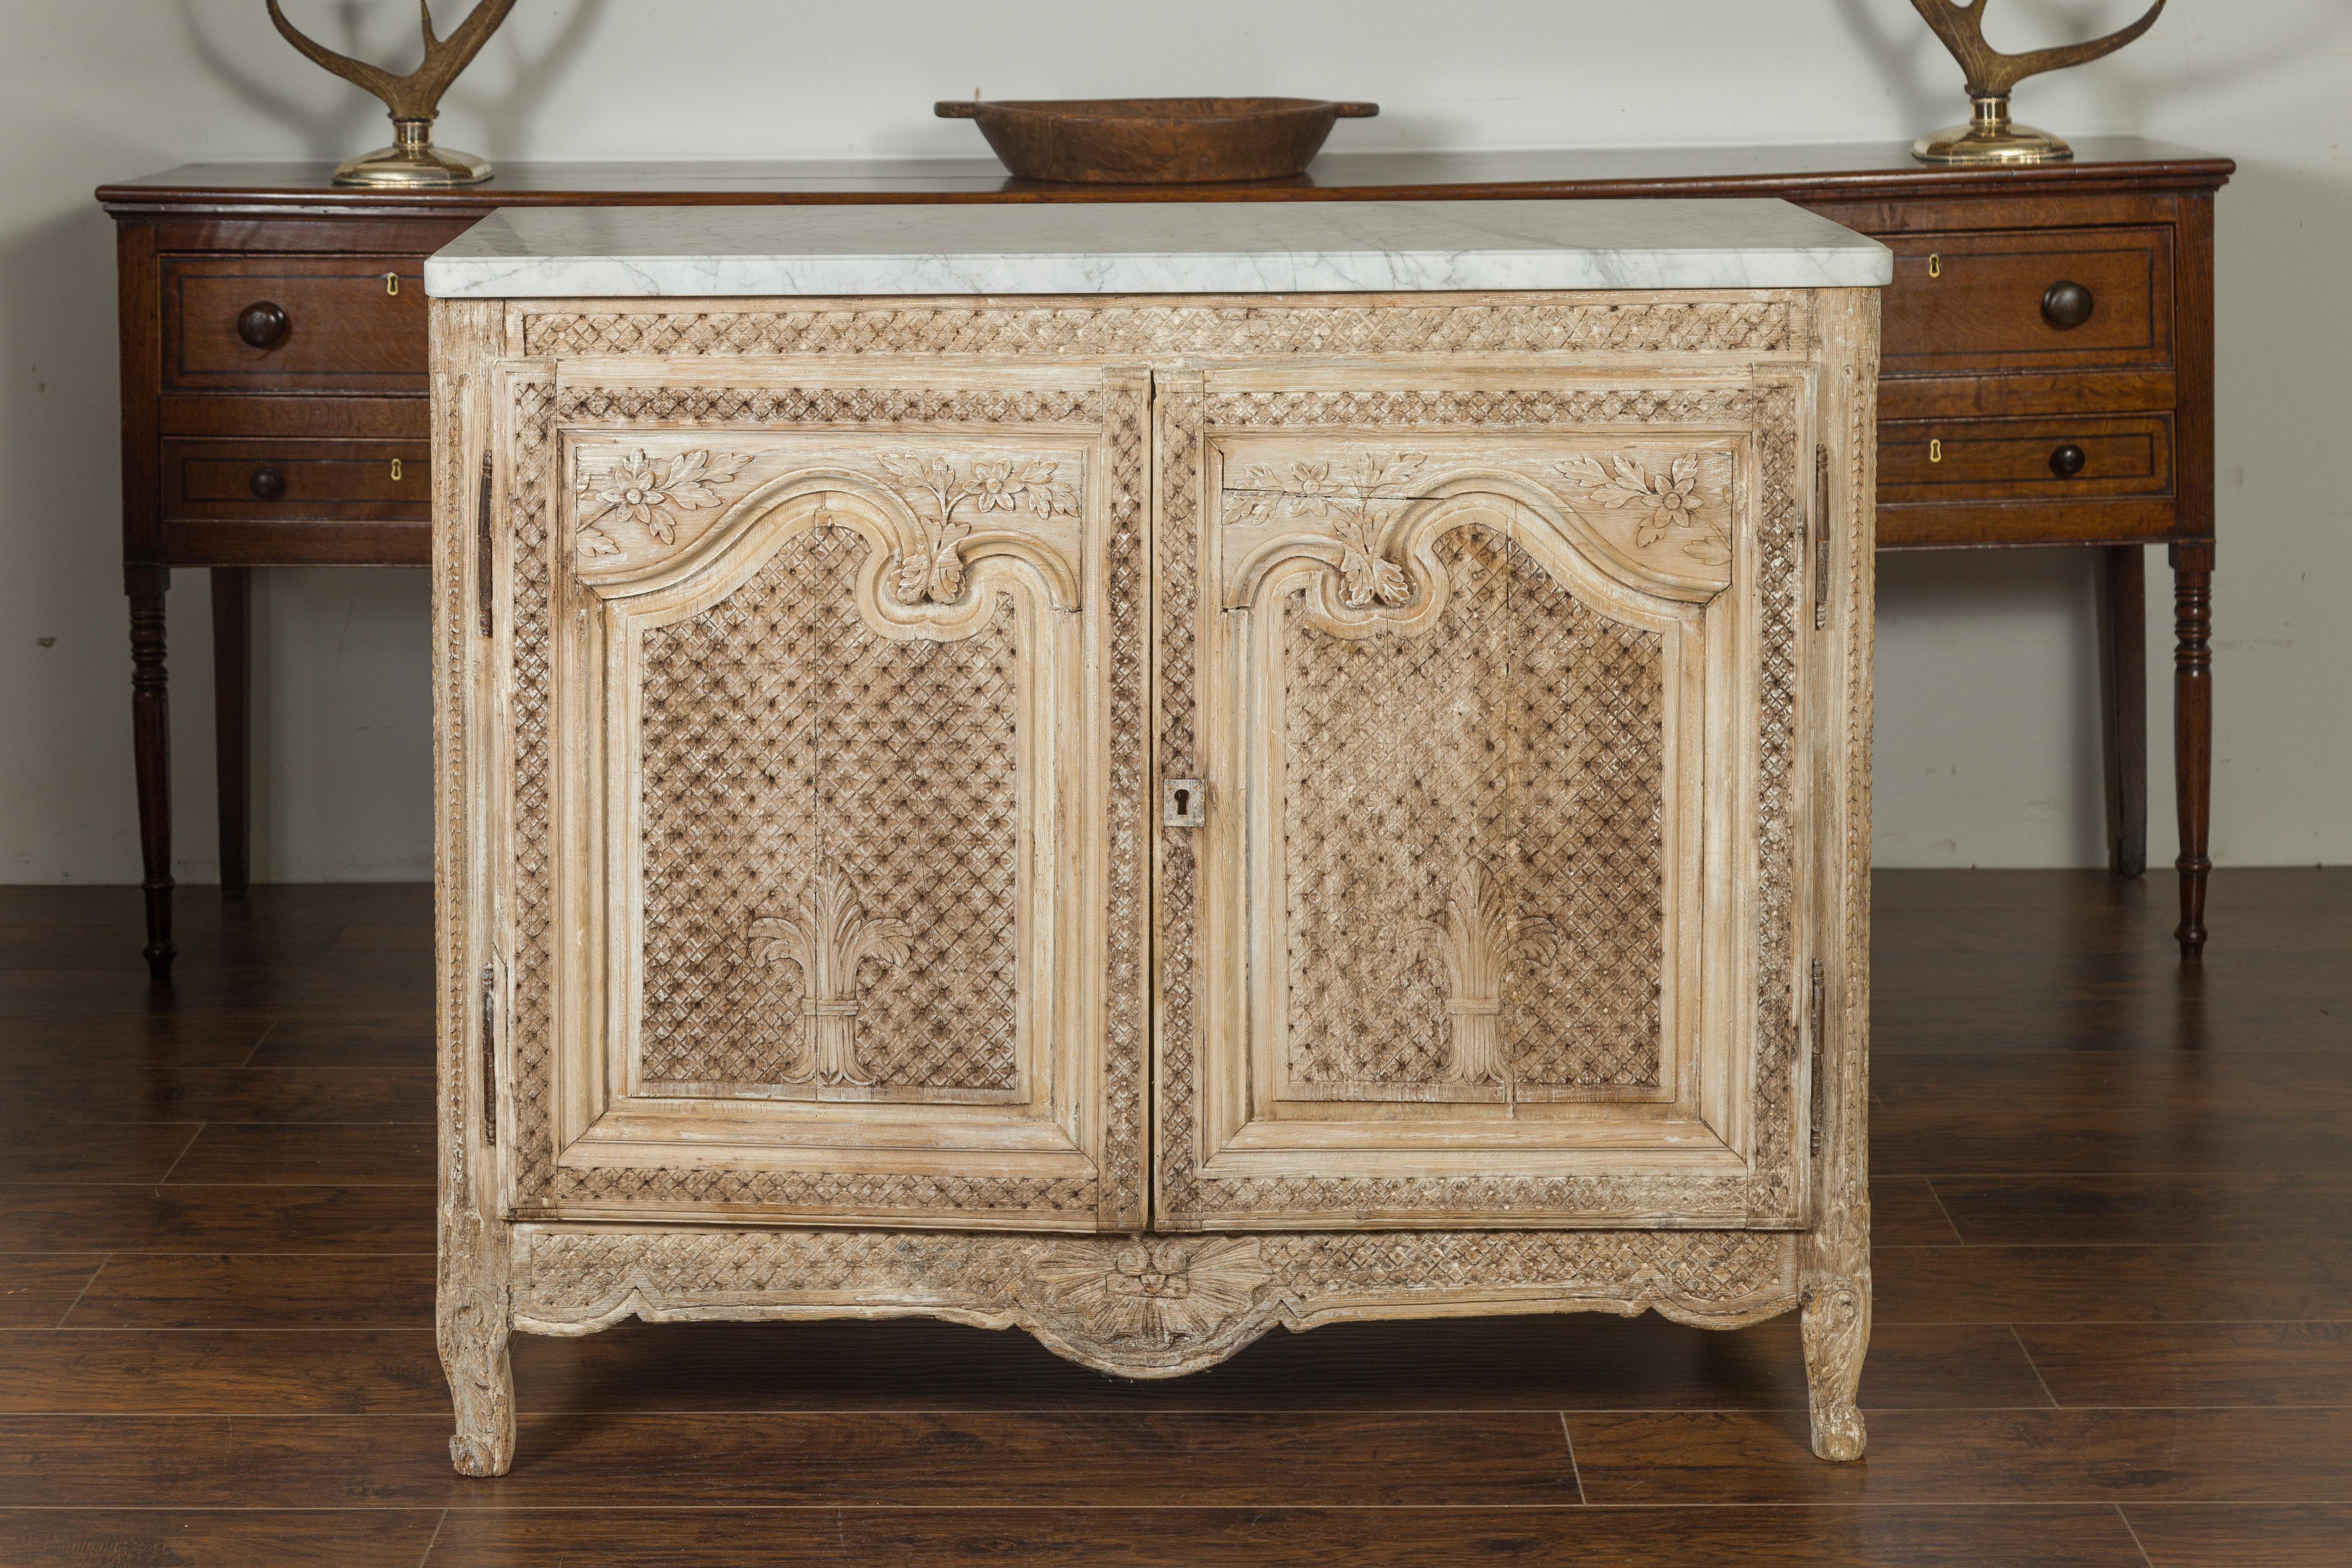 An Anglo-Indian stripped and bleached pine buffet from the early 19th century, with cross-hatch and floral motifs, and white veined marble top. Created during the first quarter of the 19th century, this stripped and bleached pine buffet features a